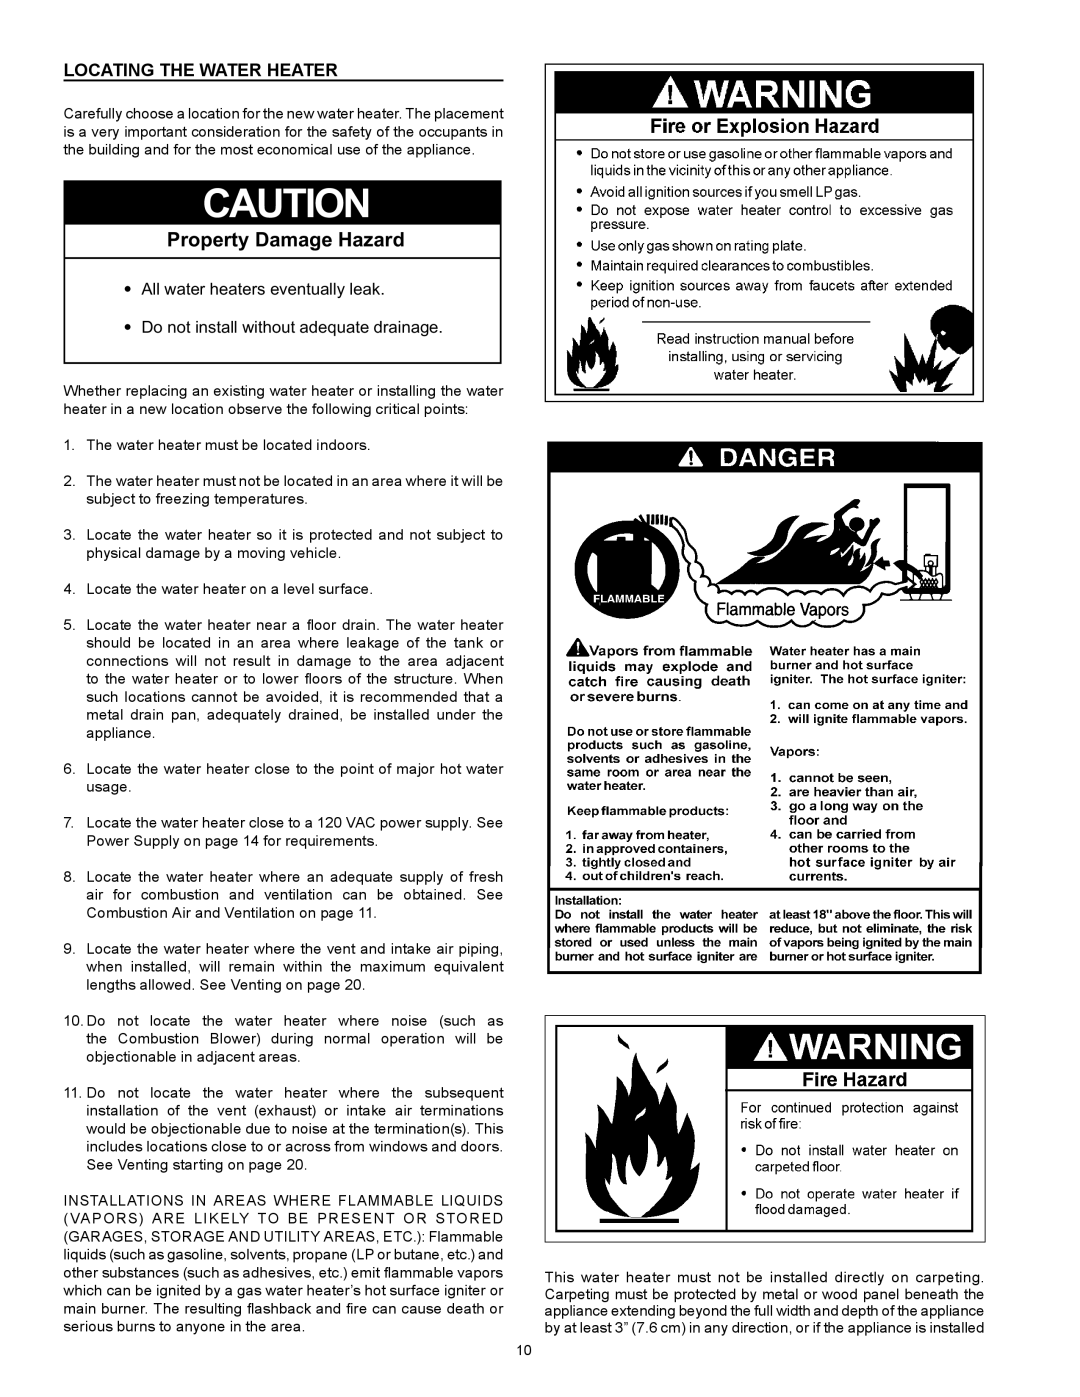 American Water Heater VG6250T100 instruction manual Property Damage Hazard, Locating The Water Heater 